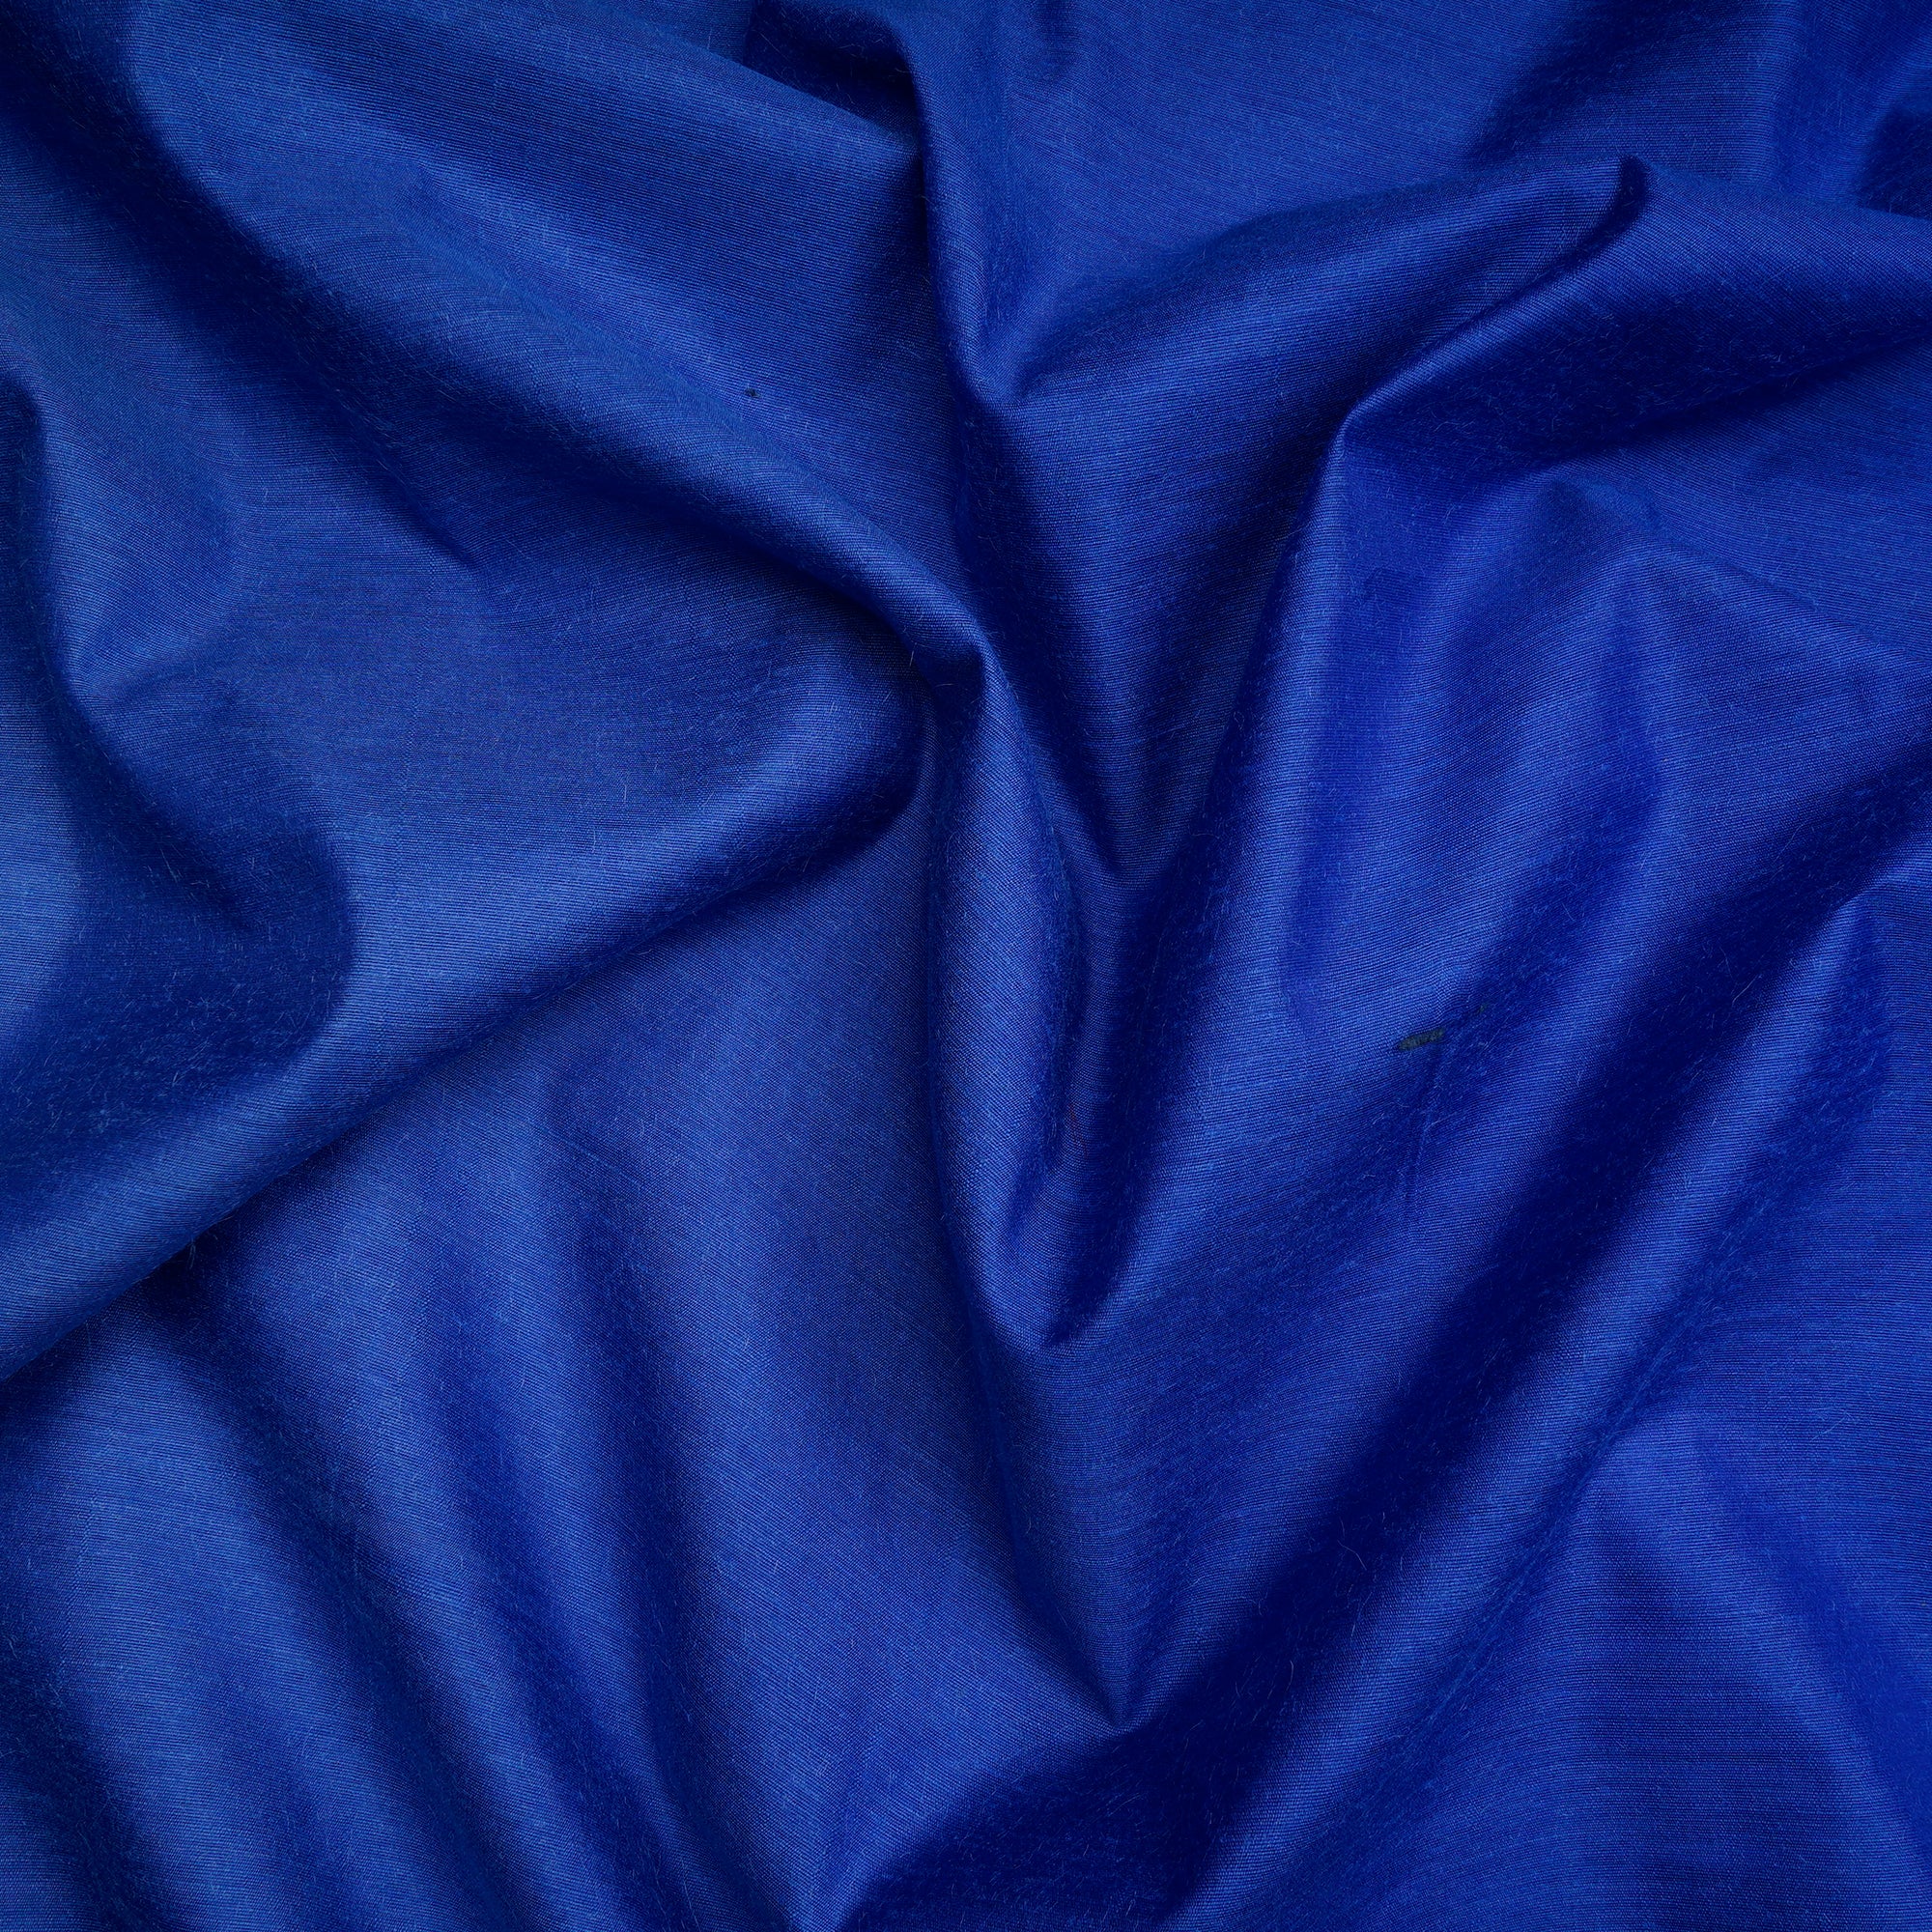 Navy Blue Ombre Dyed Tussar Muga Fabric